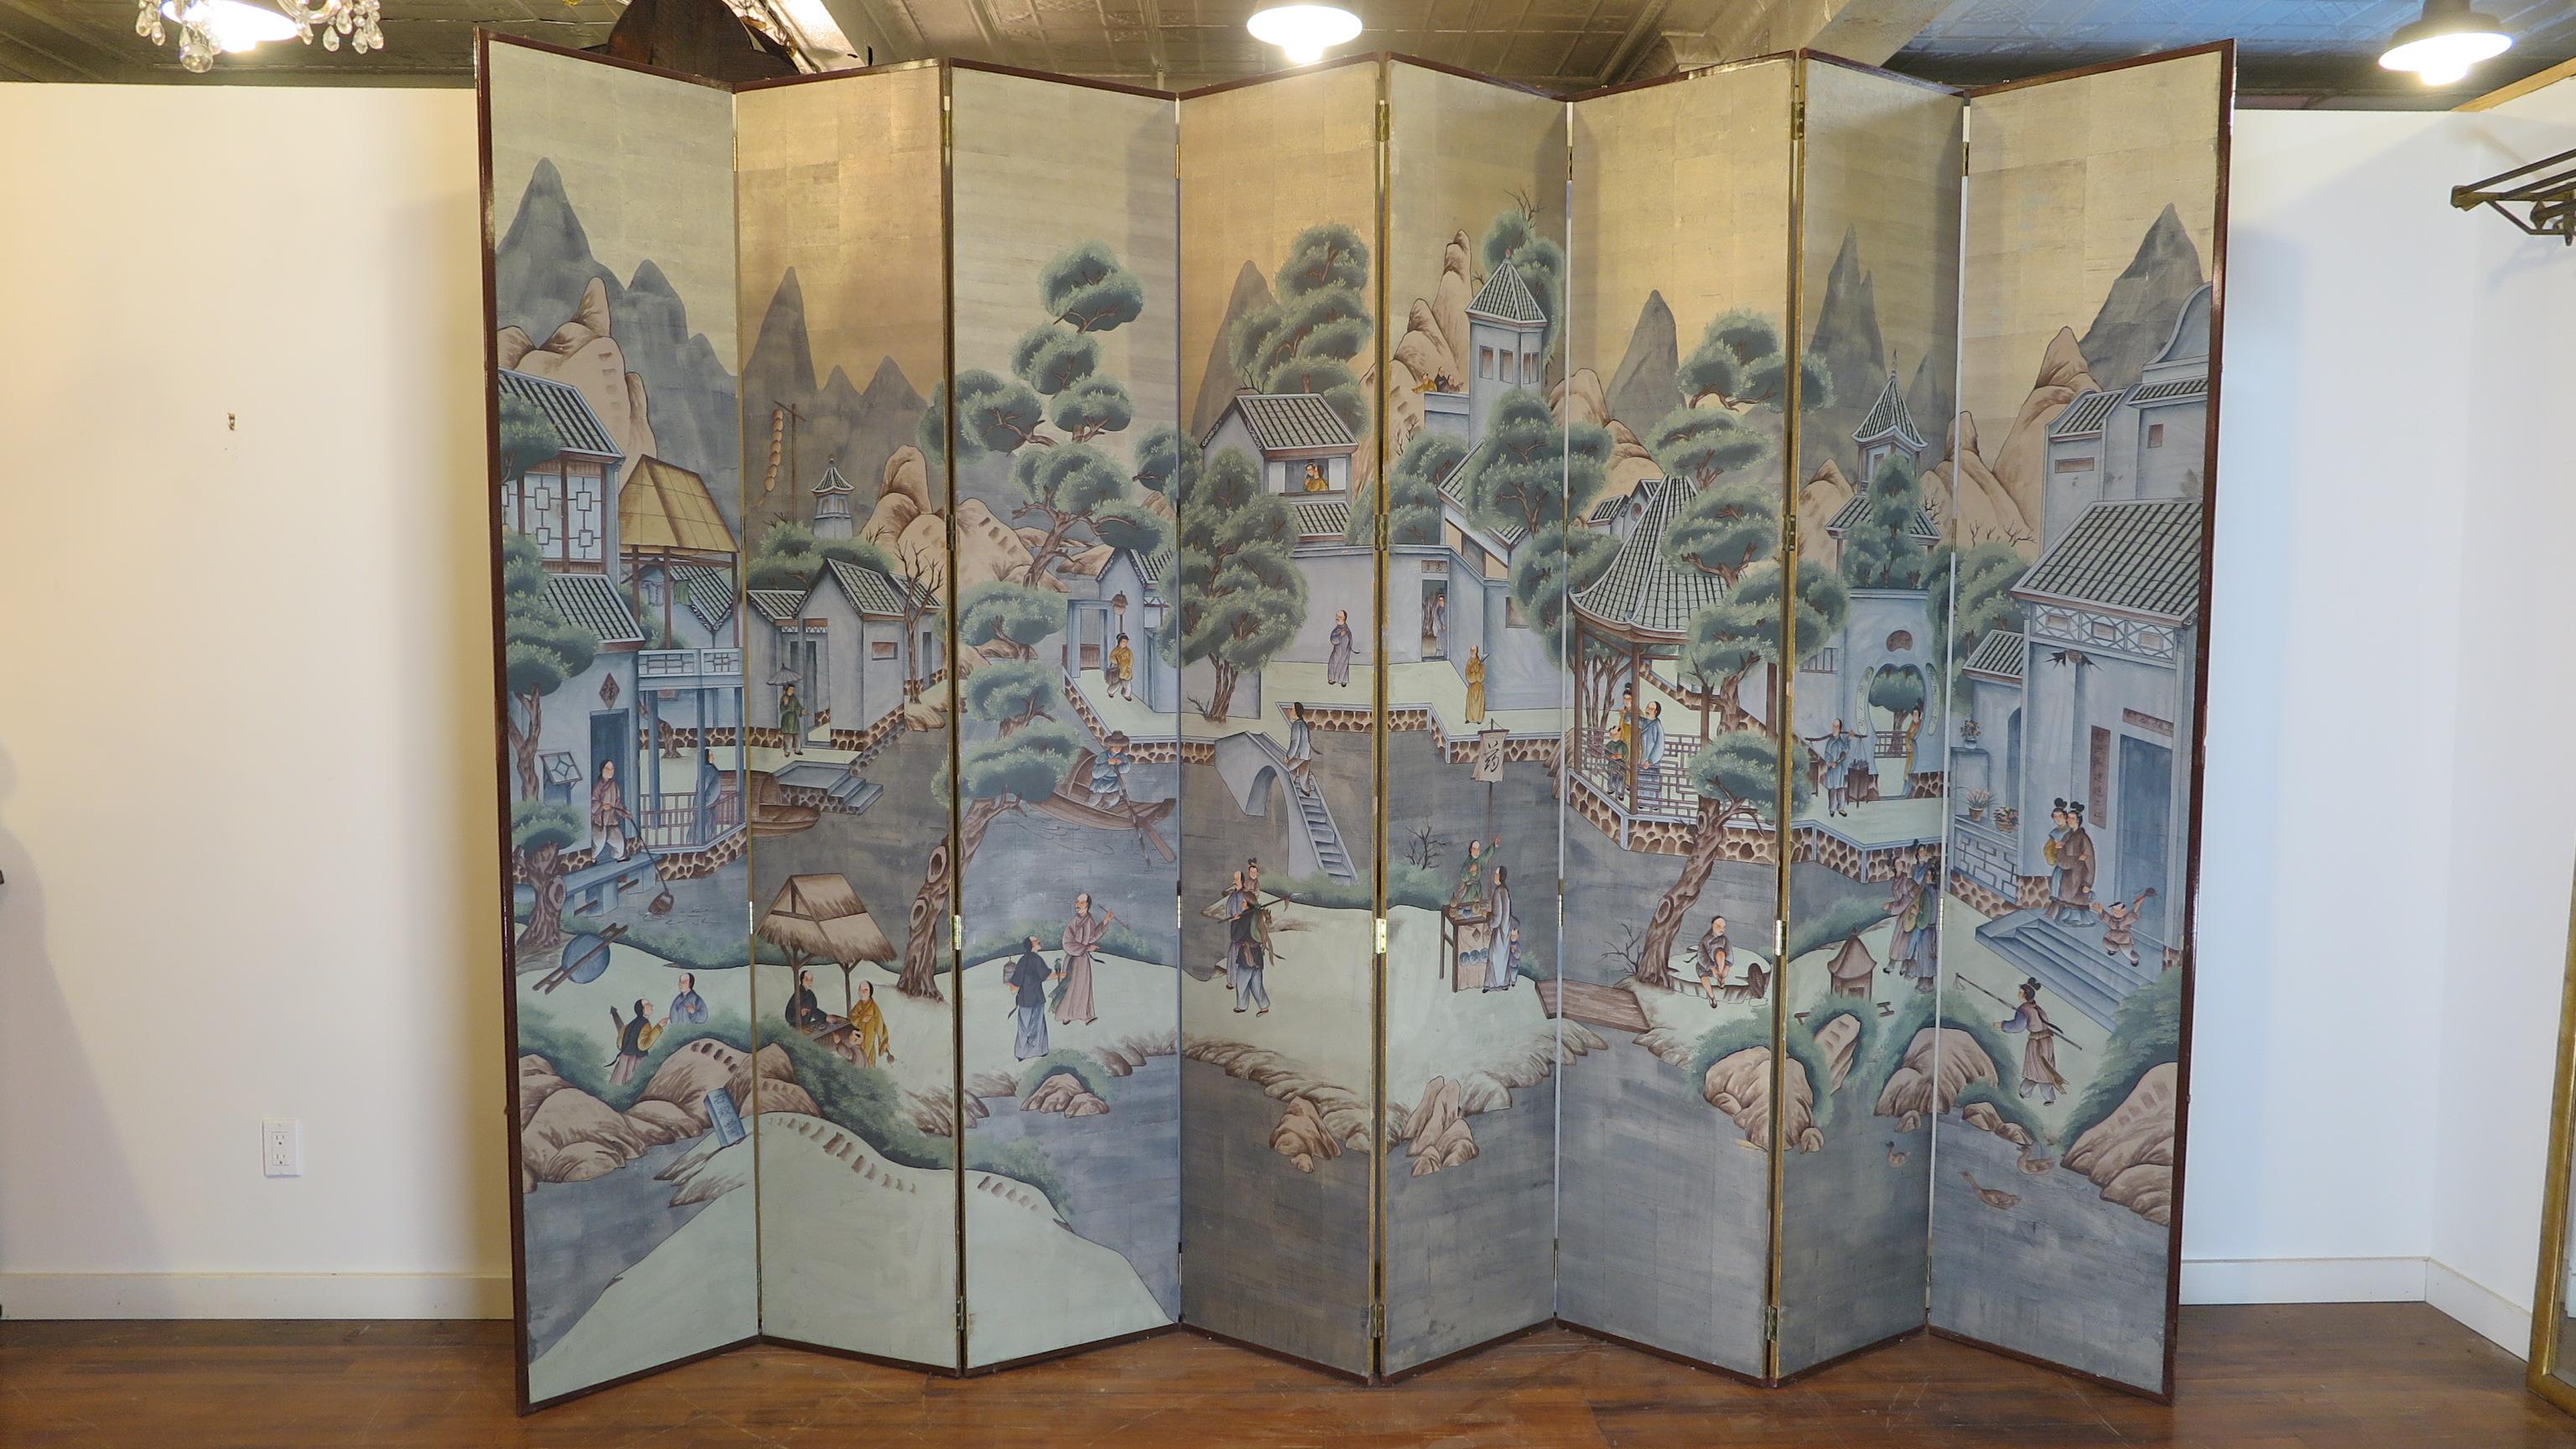 Midcentury Chinese painting folding screen. Chinese screen hand-painted over silver leaf. Elaborate hand-painted village scene depicting daily life within a rural mountain village. A day in the life of the village. Beautifully captured with great